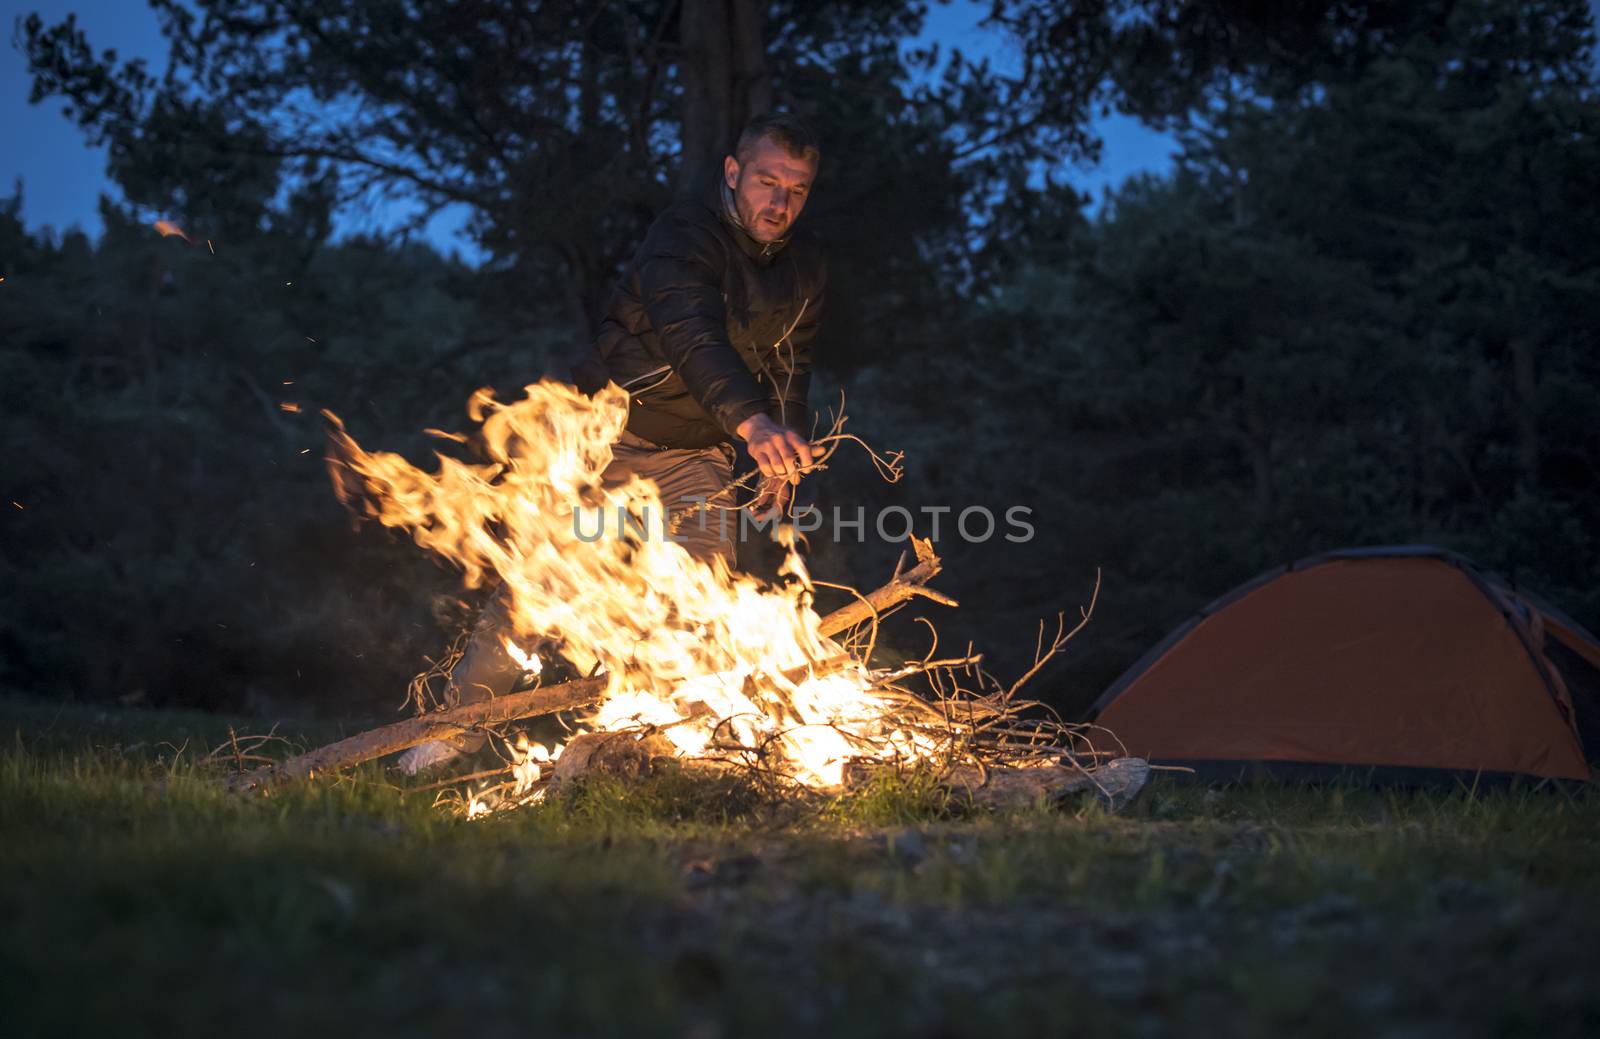 Man lights a fire in the fireplace in nature by deyan_georgiev